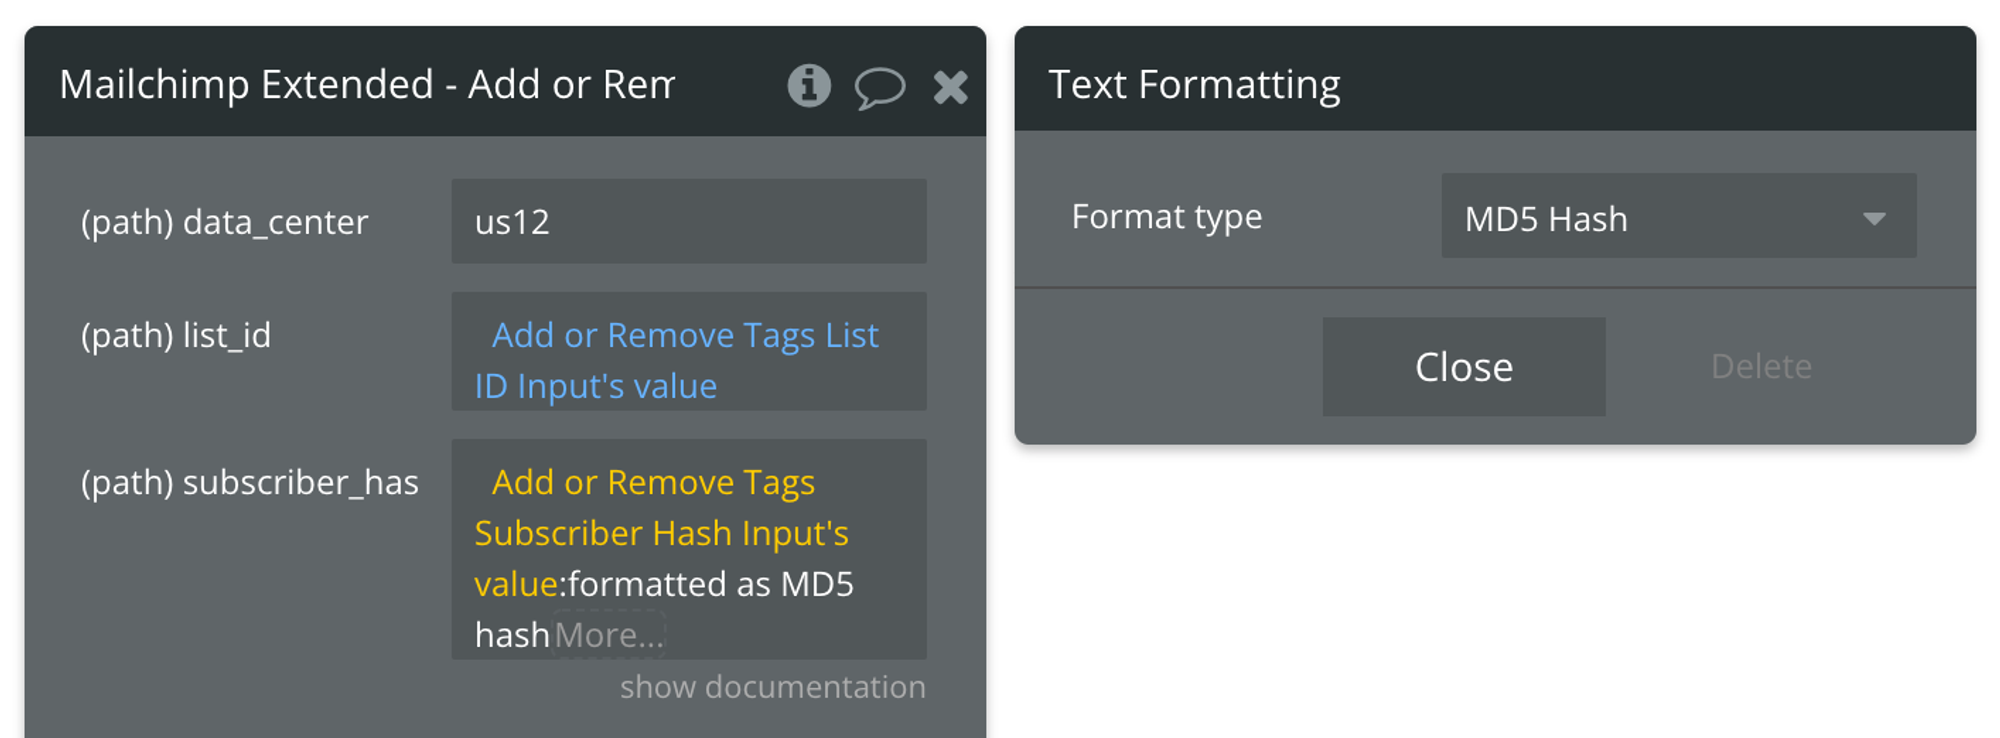 Select MD5 Hash from the format type dropdown.